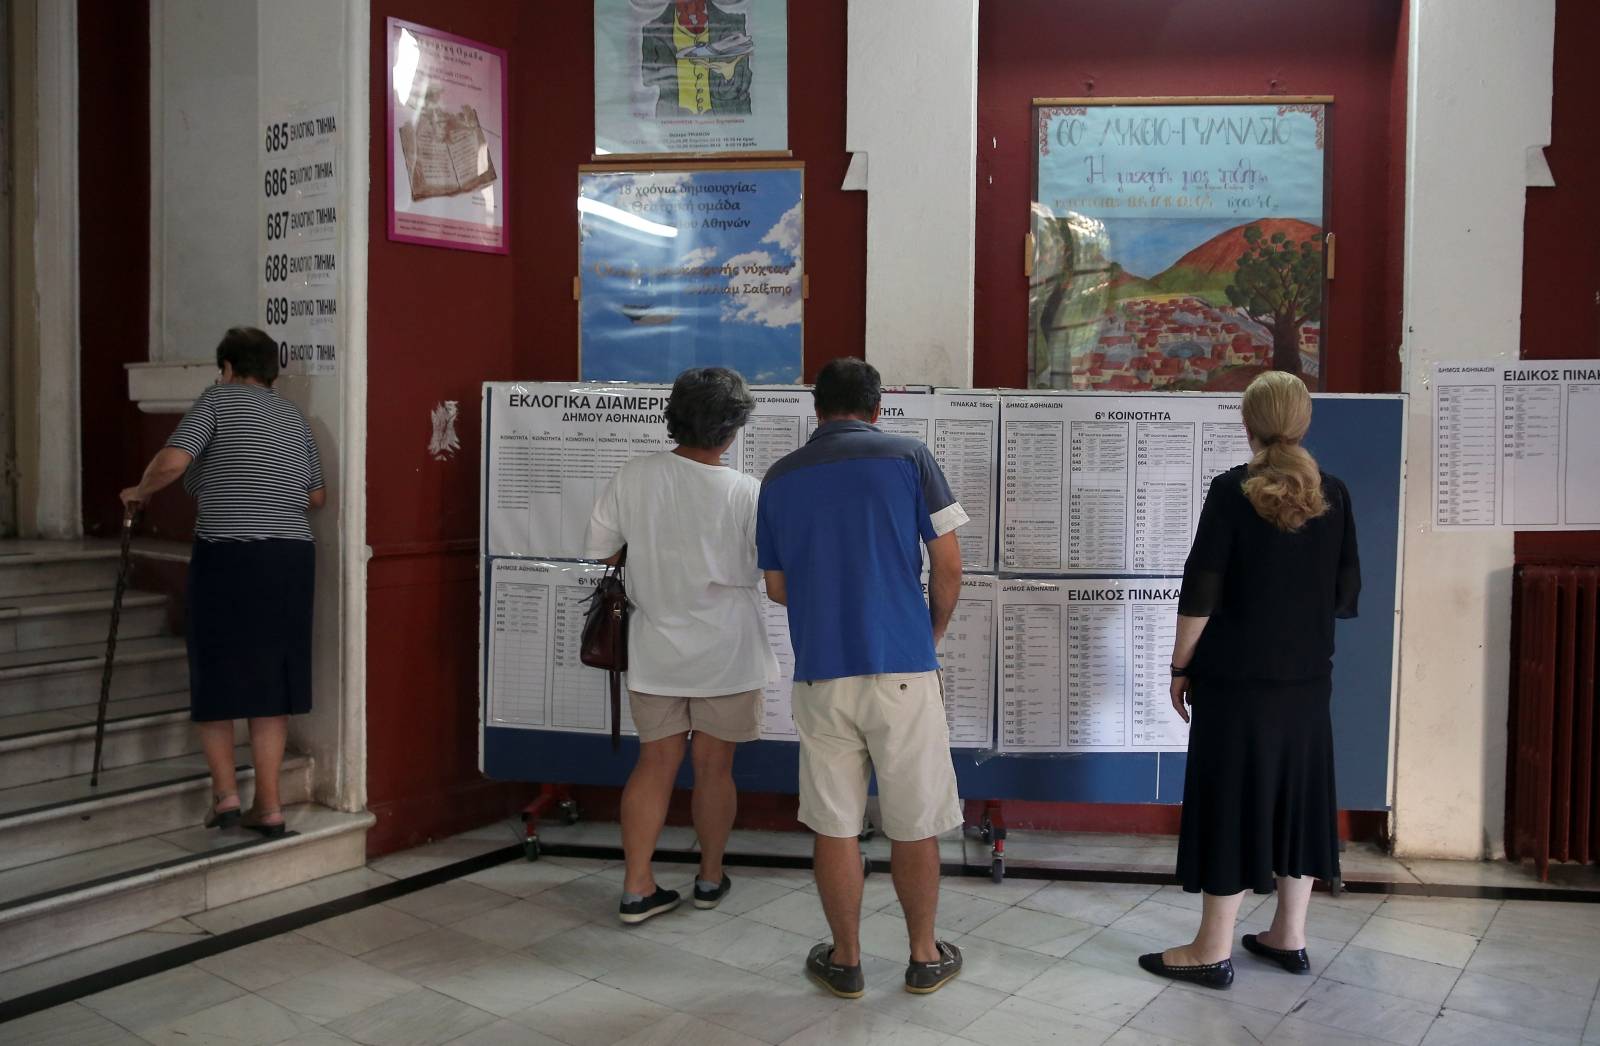 General election in Greece